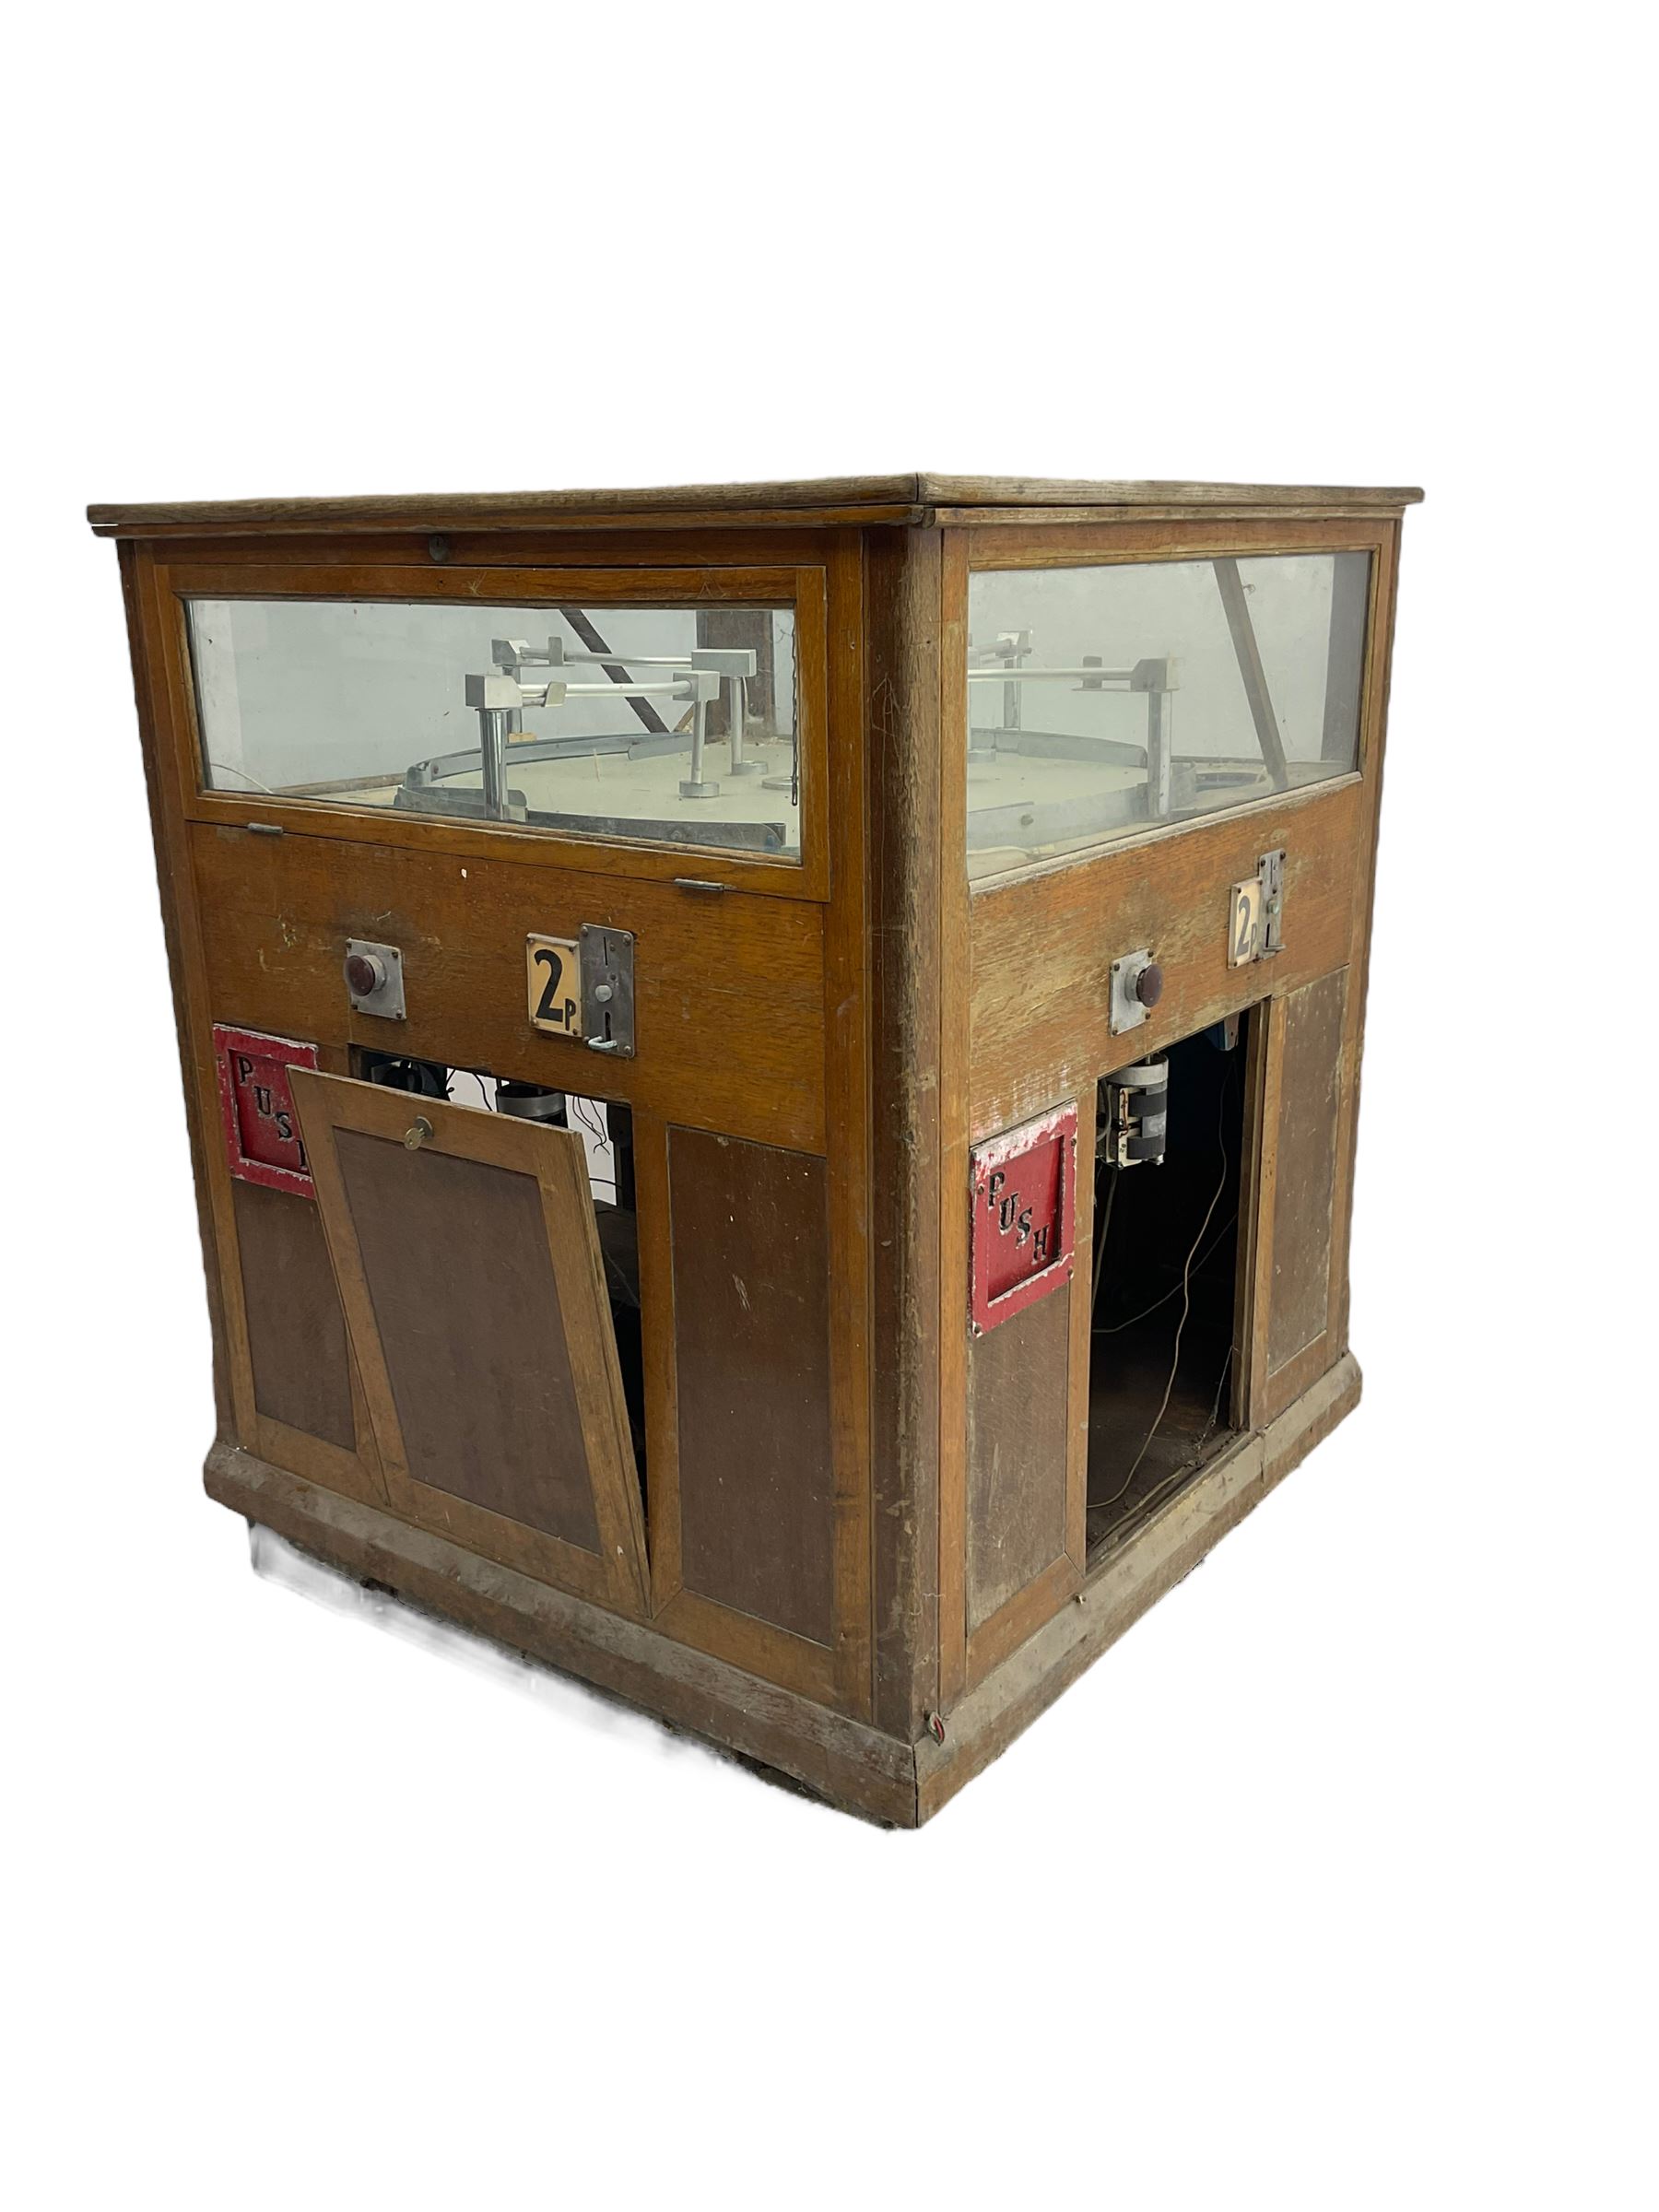 Early to mid-20th century arcade prize machine game - Image 5 of 7